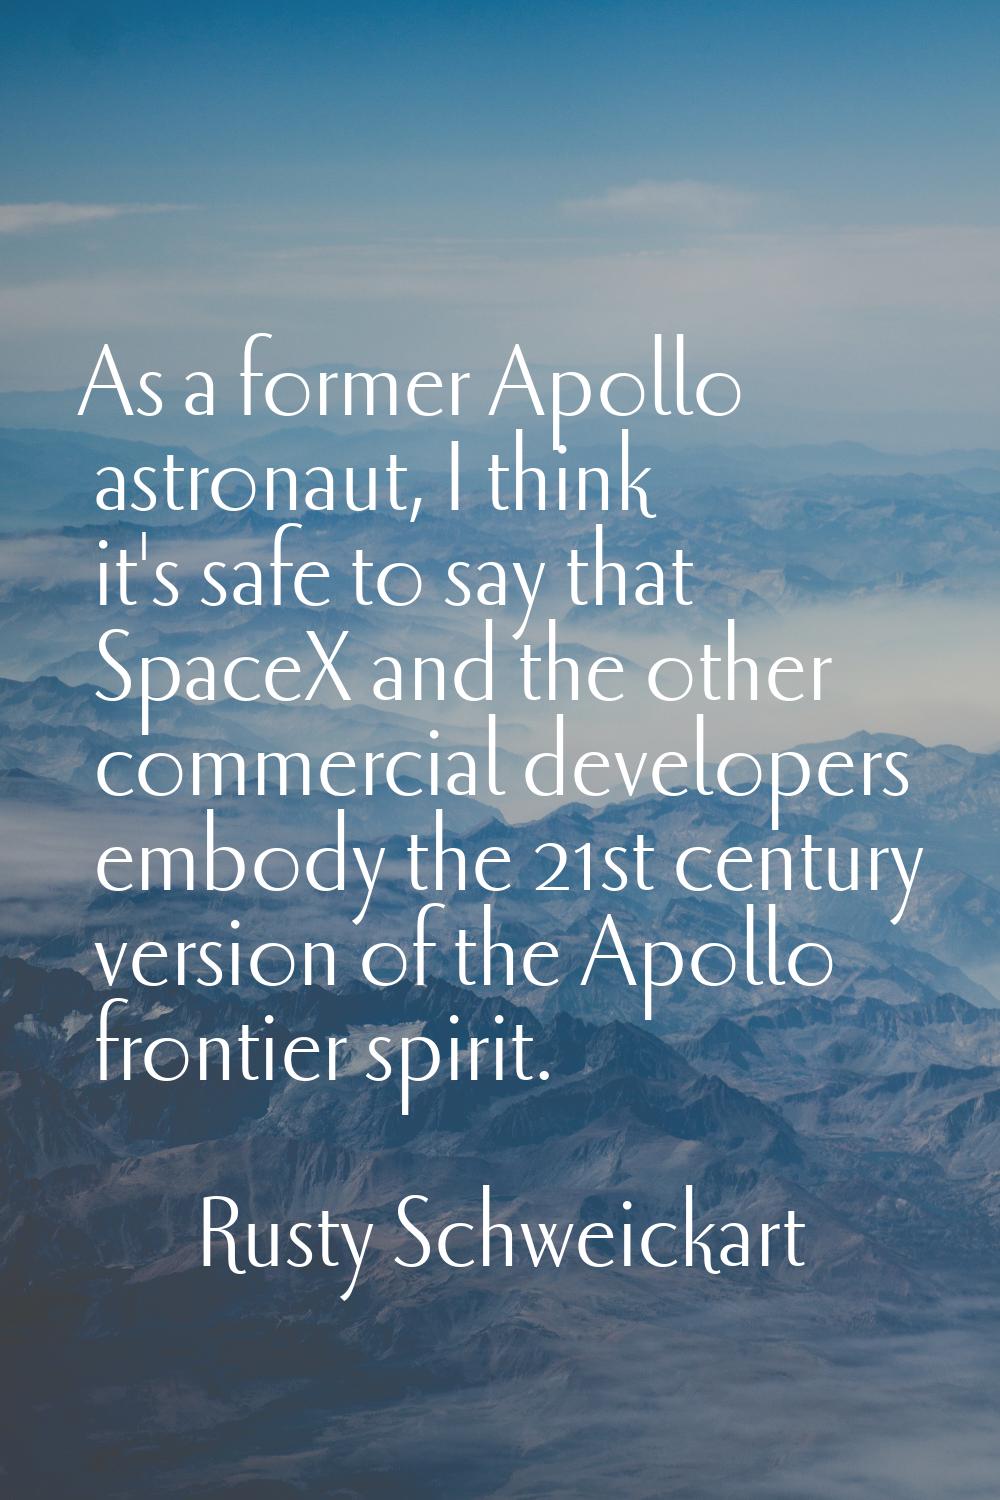 As a former Apollo astronaut, I think it's safe to say that SpaceX and the other commercial develop